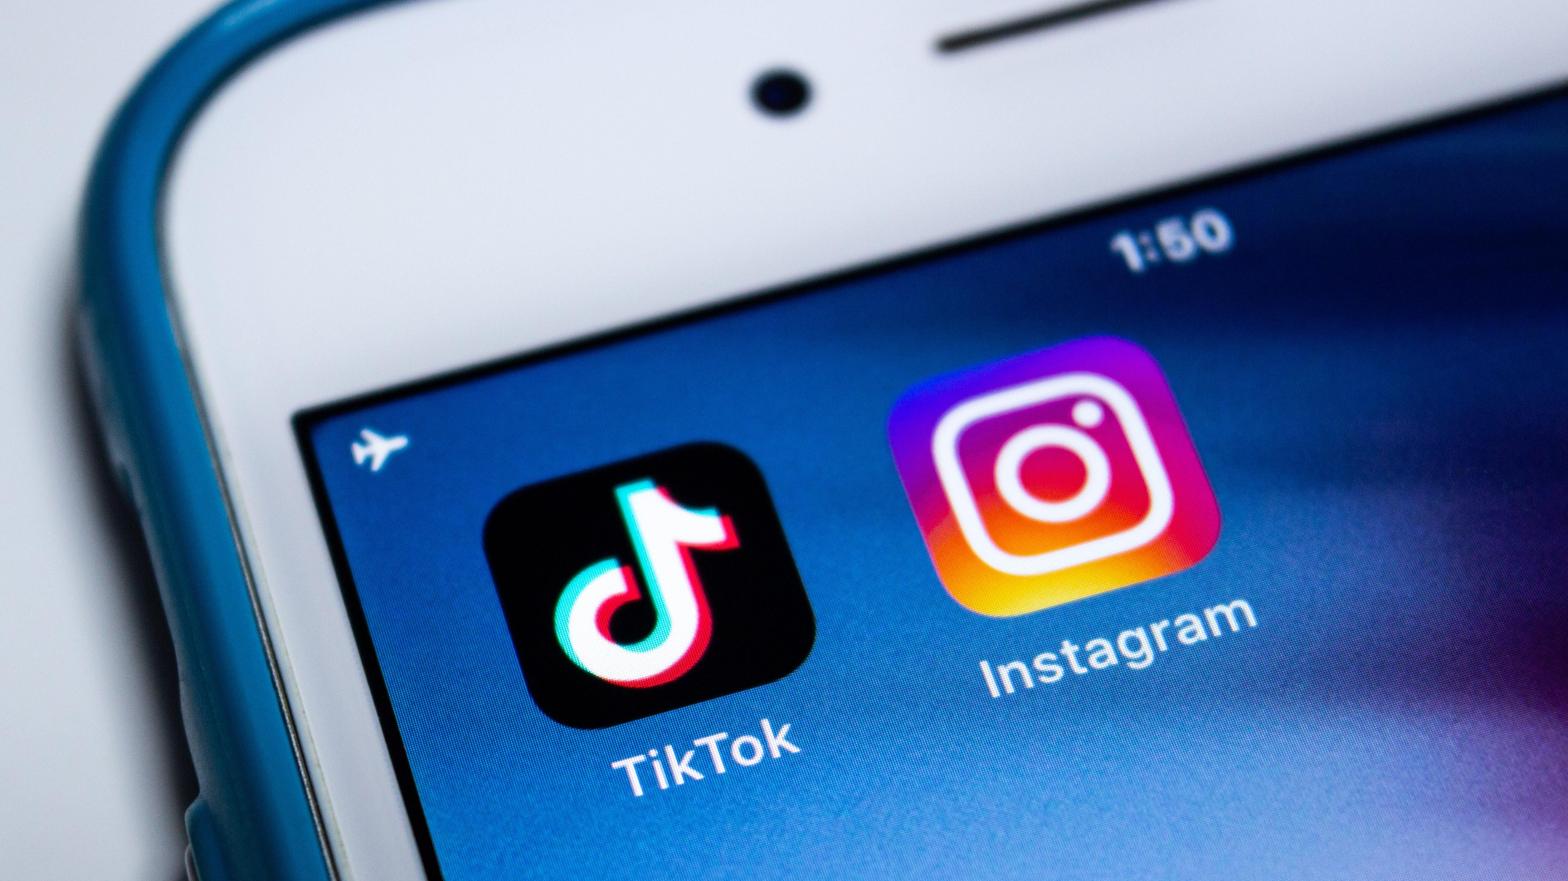 Instagram users have not sunk their teeth into Instagram's TikTok-like Reels as much as Meta has wanted them to, according to reported internal documents. (Photo: Koshiro K, Shutterstock)